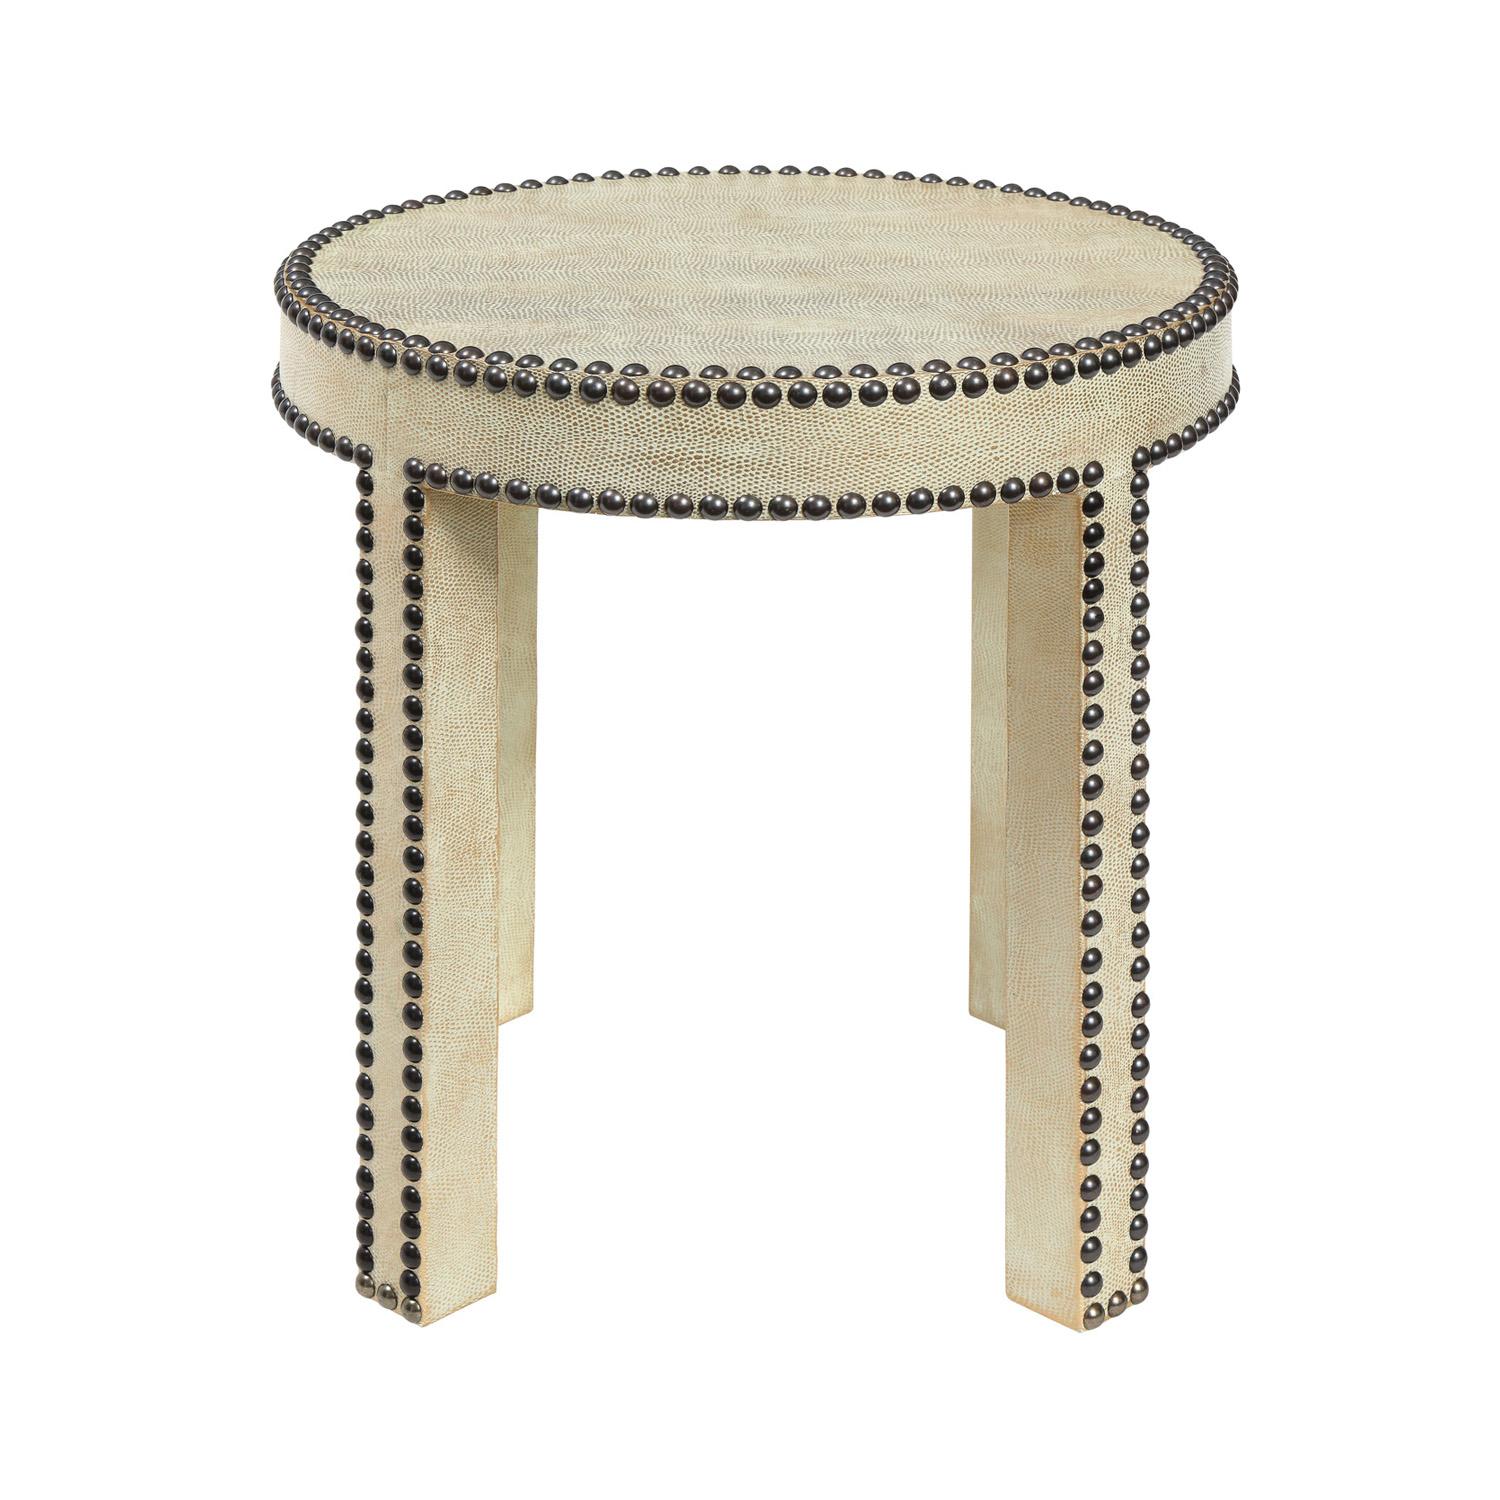 Round side table covered in platinum embossed lizard leather with bronze studs around top and legs by Evan Lobel for Lobel Originals, American 2021.

Diam: 16 inches
H: 17.5 inches